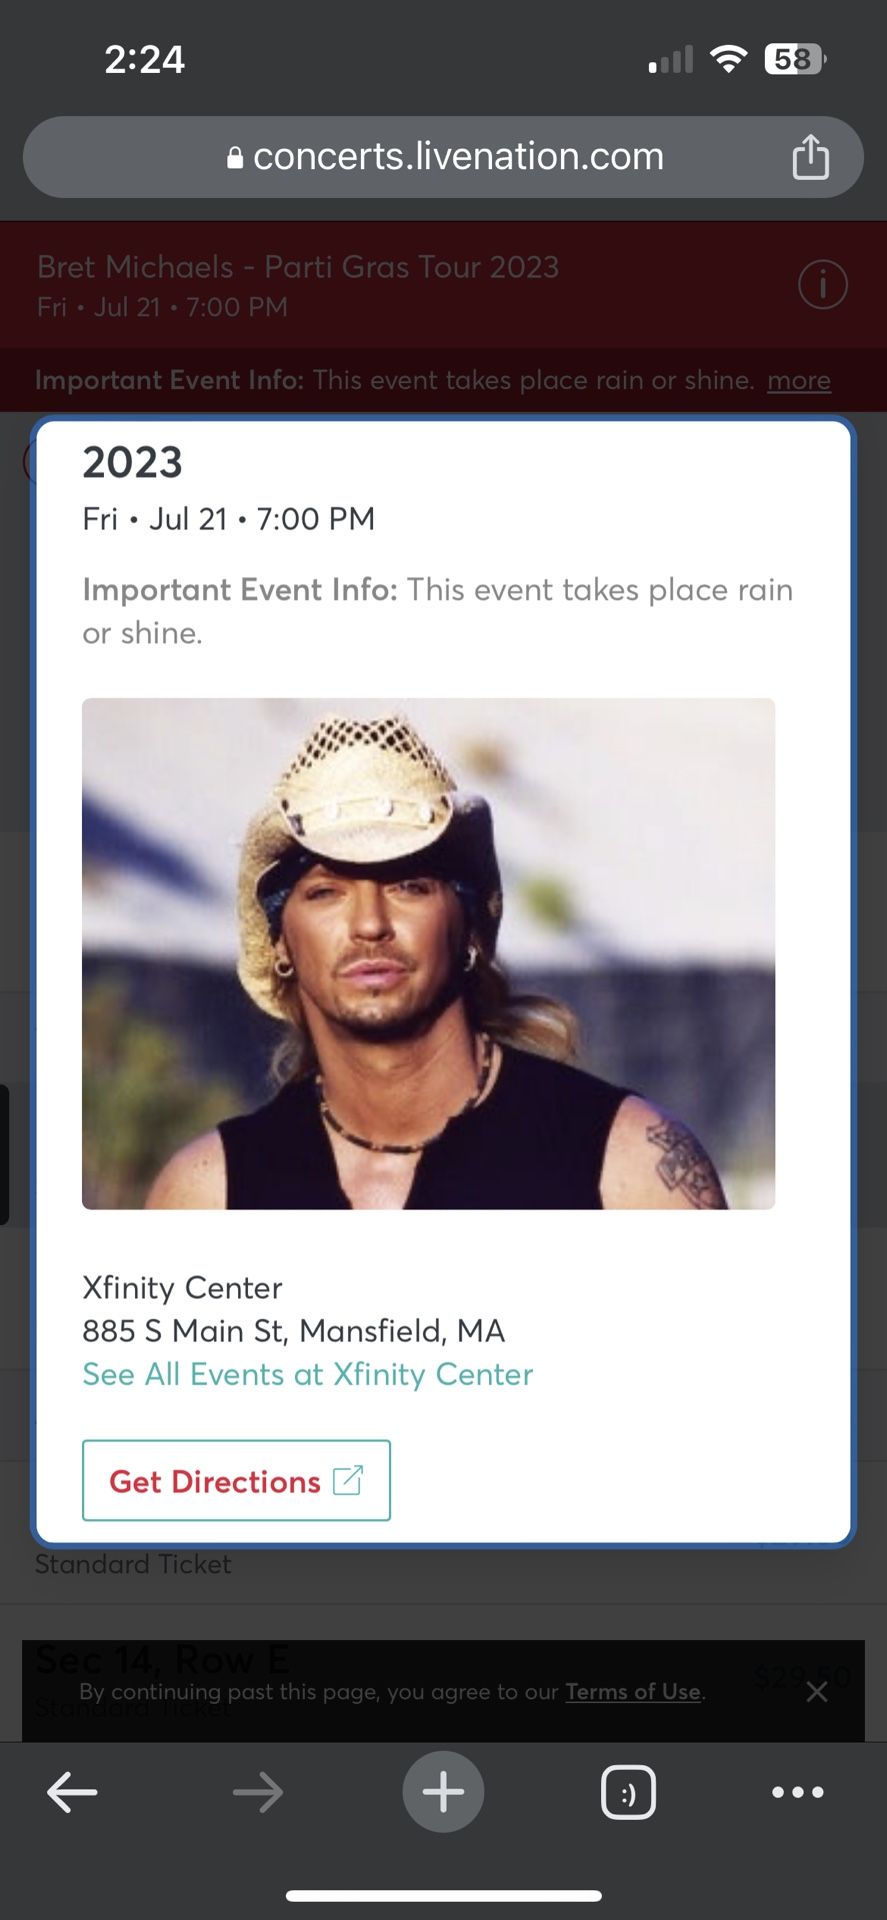 2 Tickets for Bret Michaels